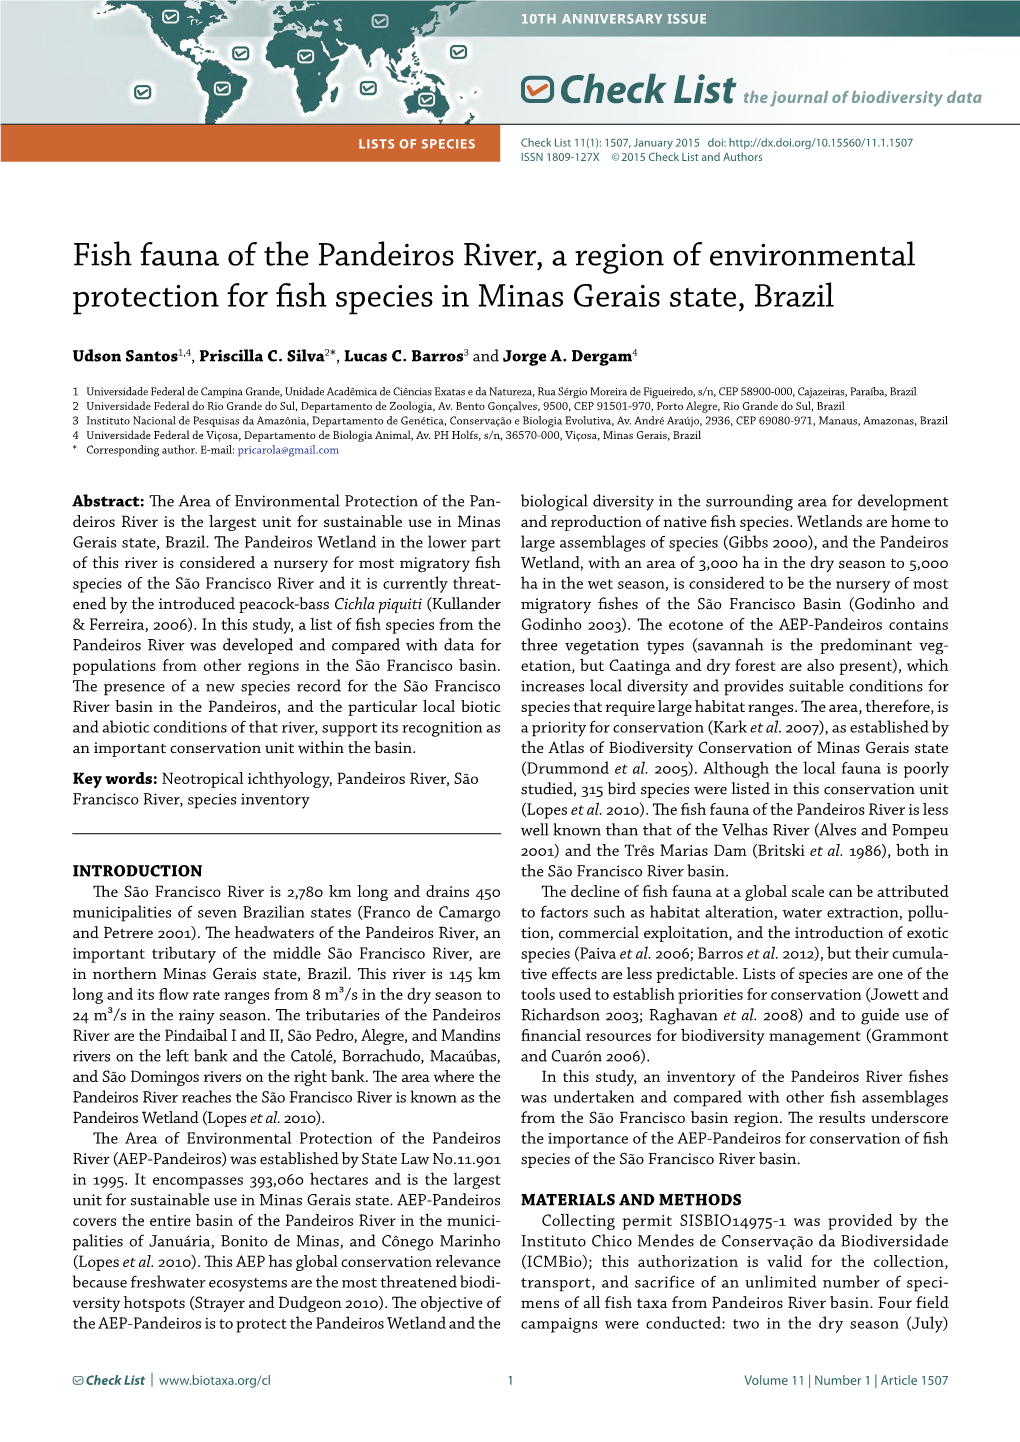 Fish Fauna of the Pandeiros River, a Region of Environmental Protection for Fish Species in Minas Gerais State, Brazil